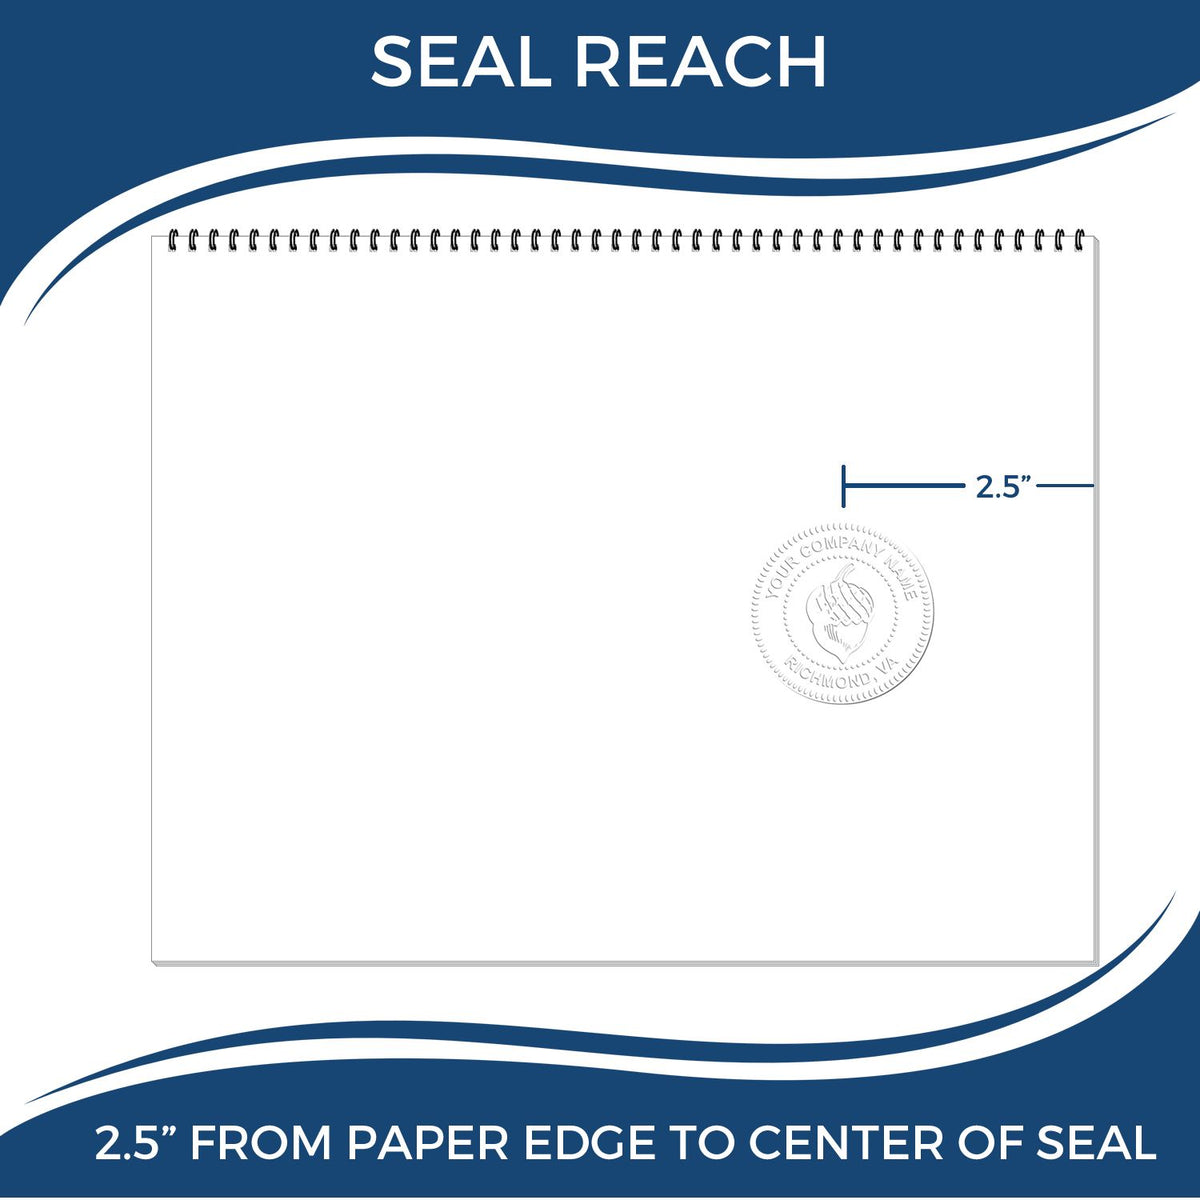 An infographic showing the seal reach which is represented by a ruler and a miniature seal image of the Heavy Duty Cast Iron Nebraska Architect Embosser